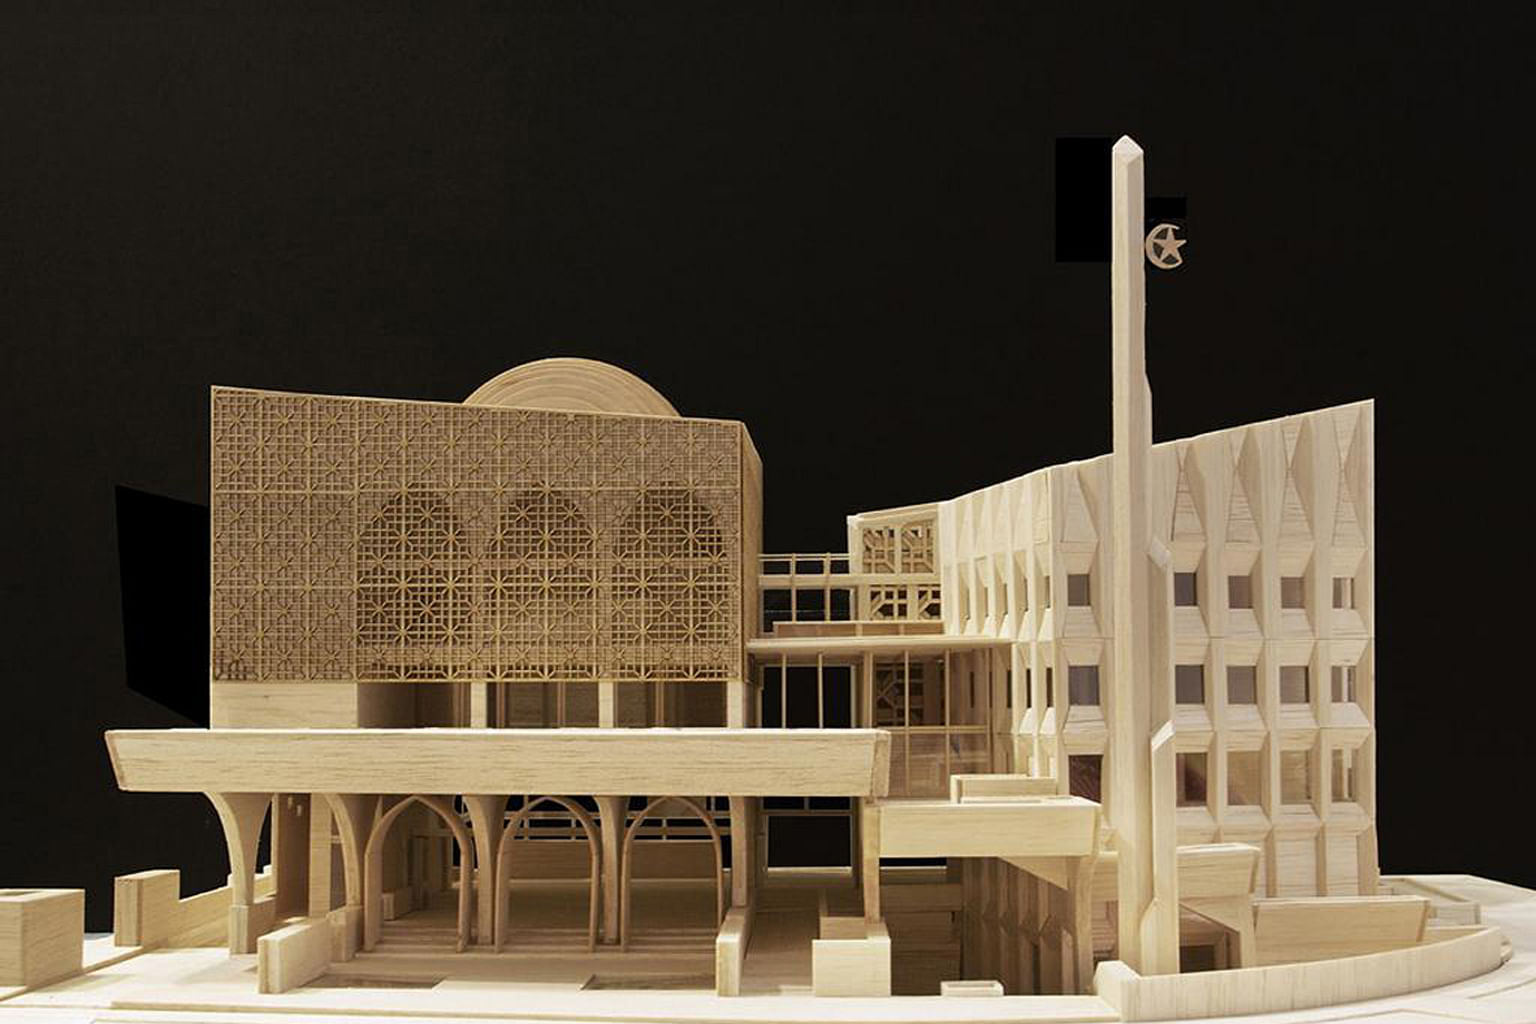 A large display model of Al-Islah Mosque in Punggol, designed by Formwerkz Architects, is on show at the Making Architecture exhibition.